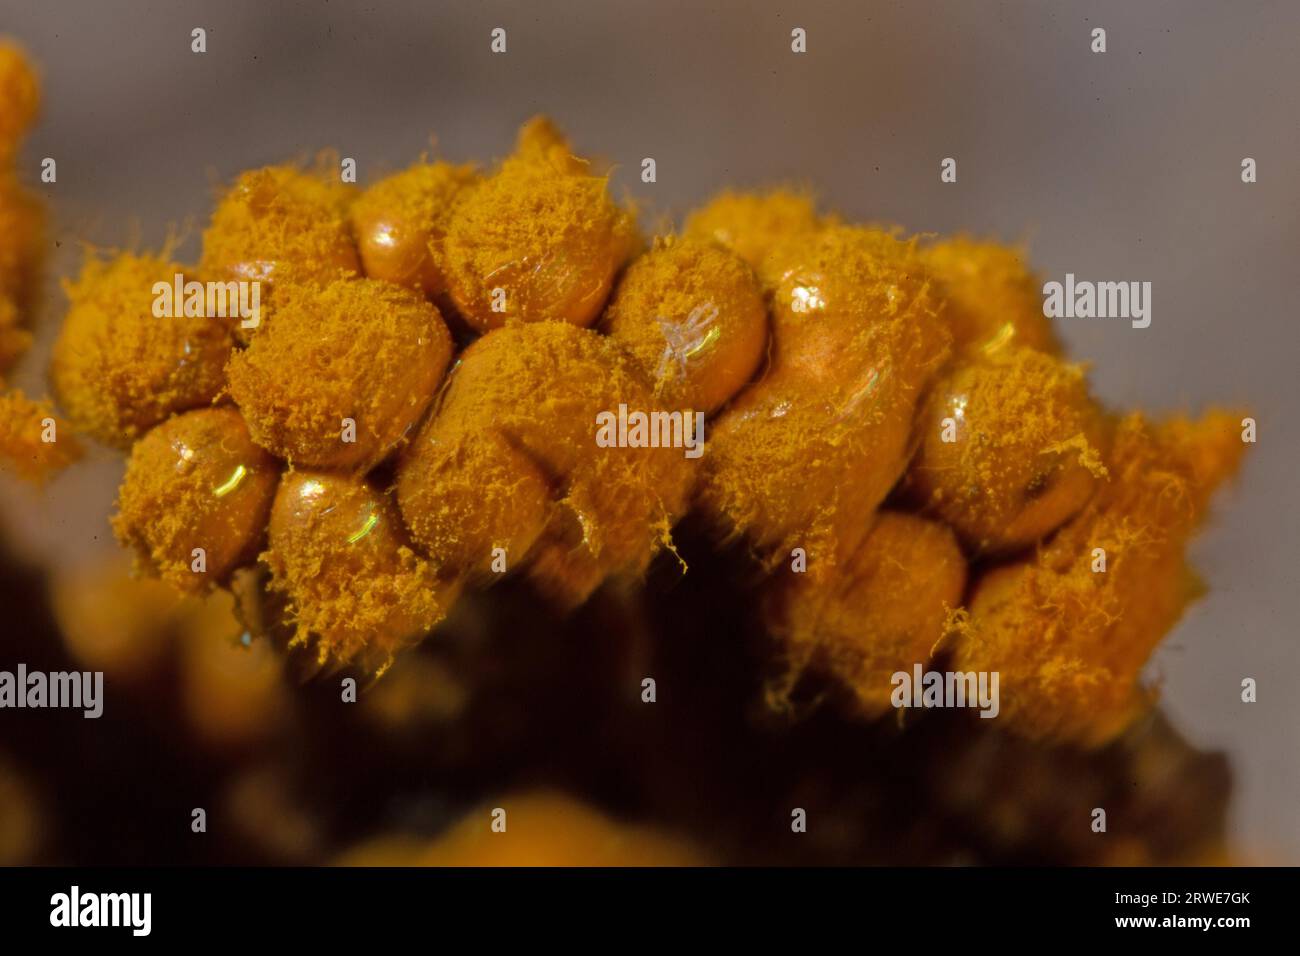 Yellow false hairy mushroom some fruiting bodies with fuzzy yellowish heads next to each other Stock Photo